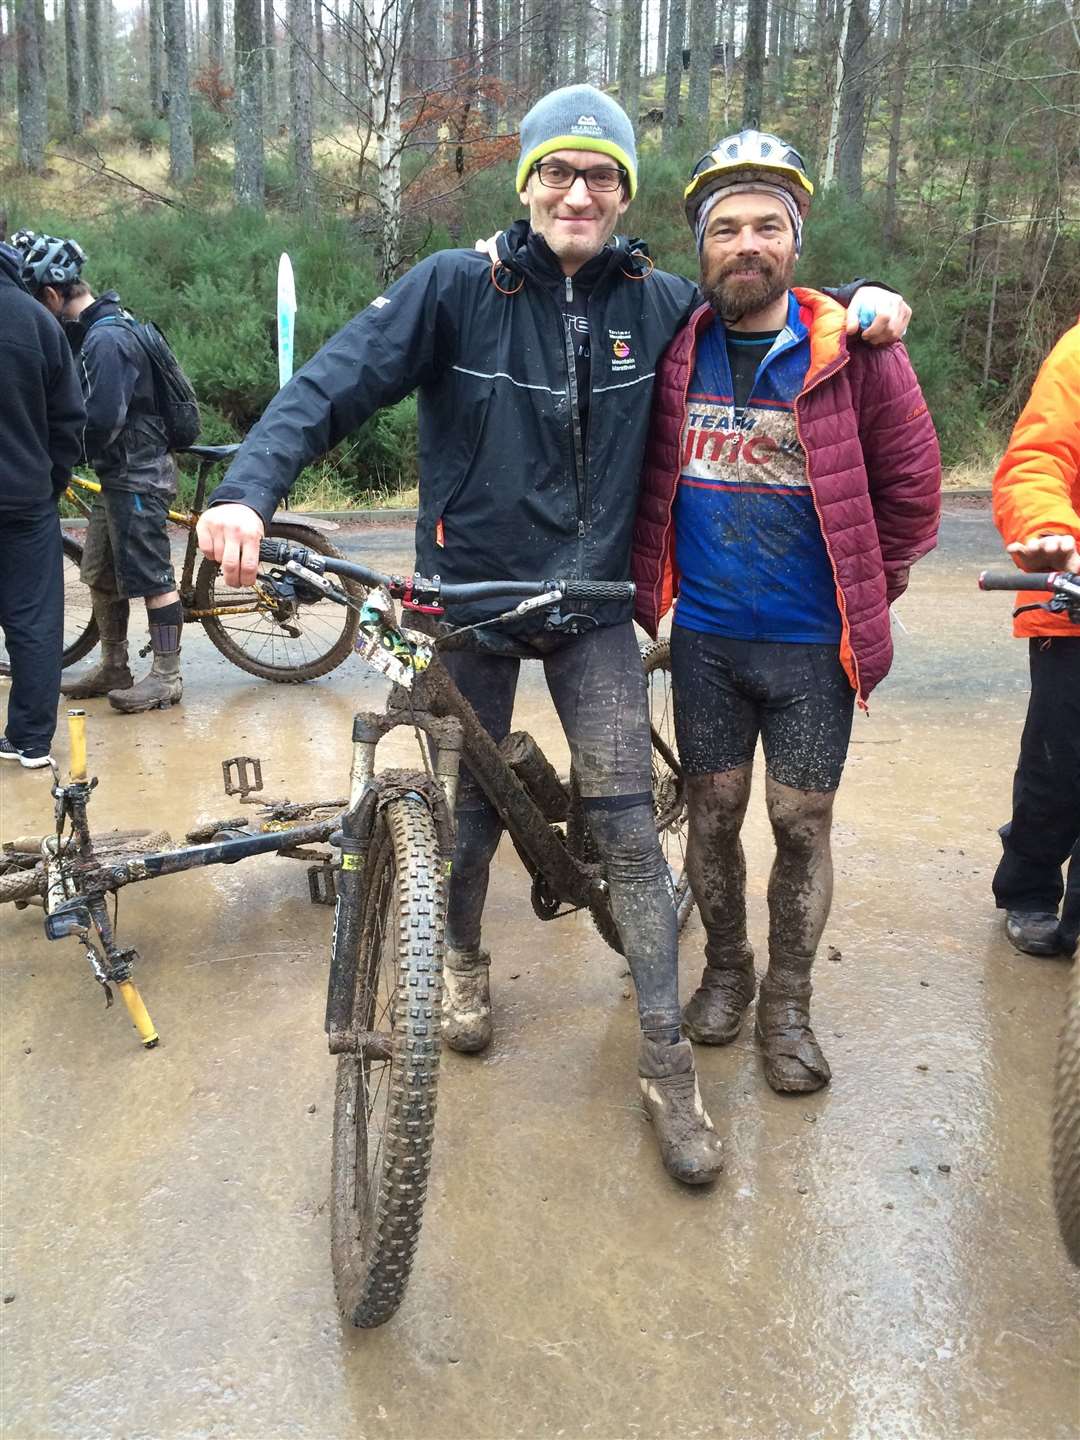 Mike and his team partner Jon triumphant in 2016.